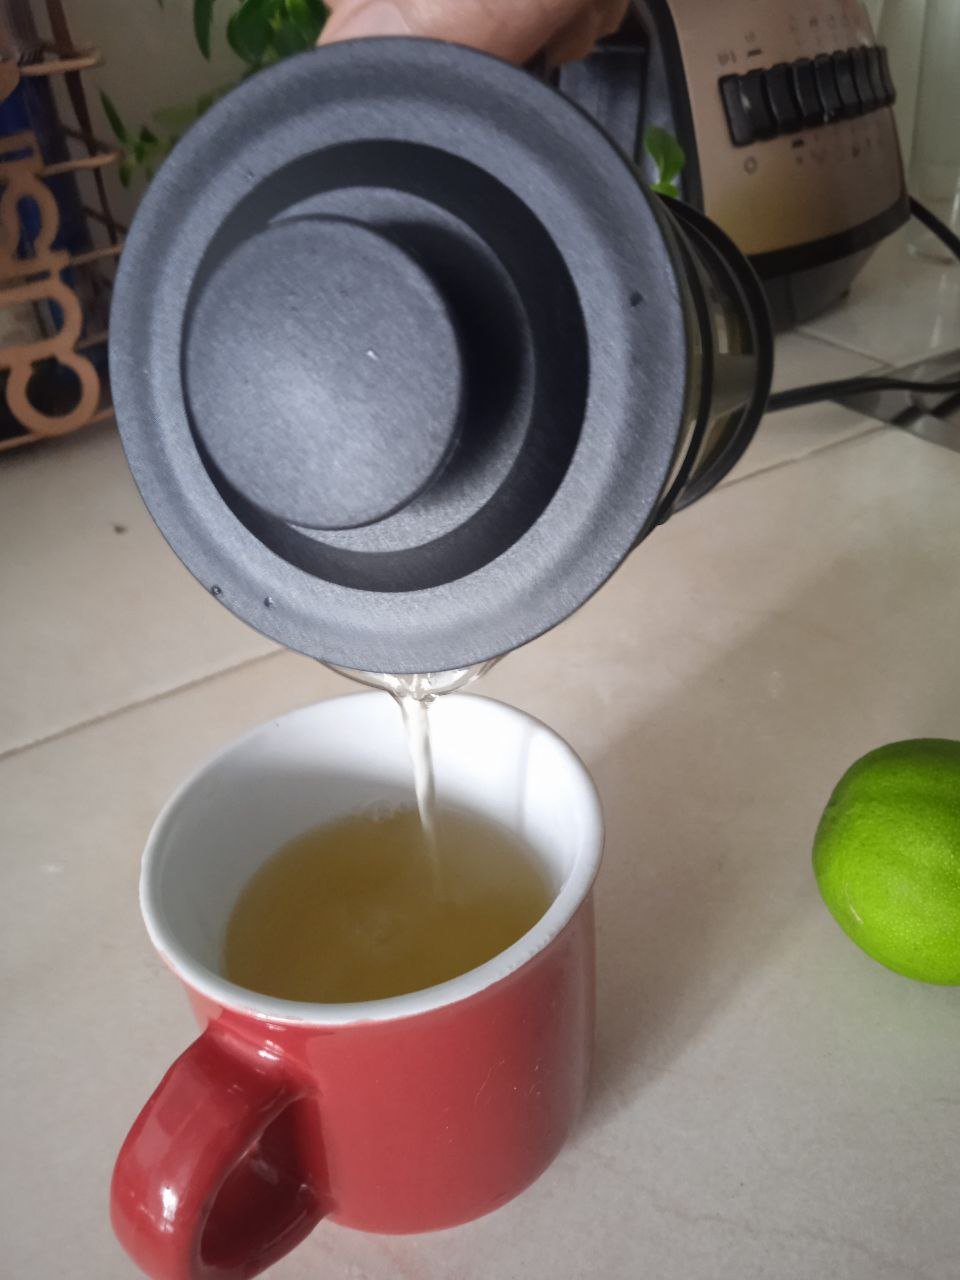 Testing my new French press with turmeric tea in tea bags (SPA-ENG)